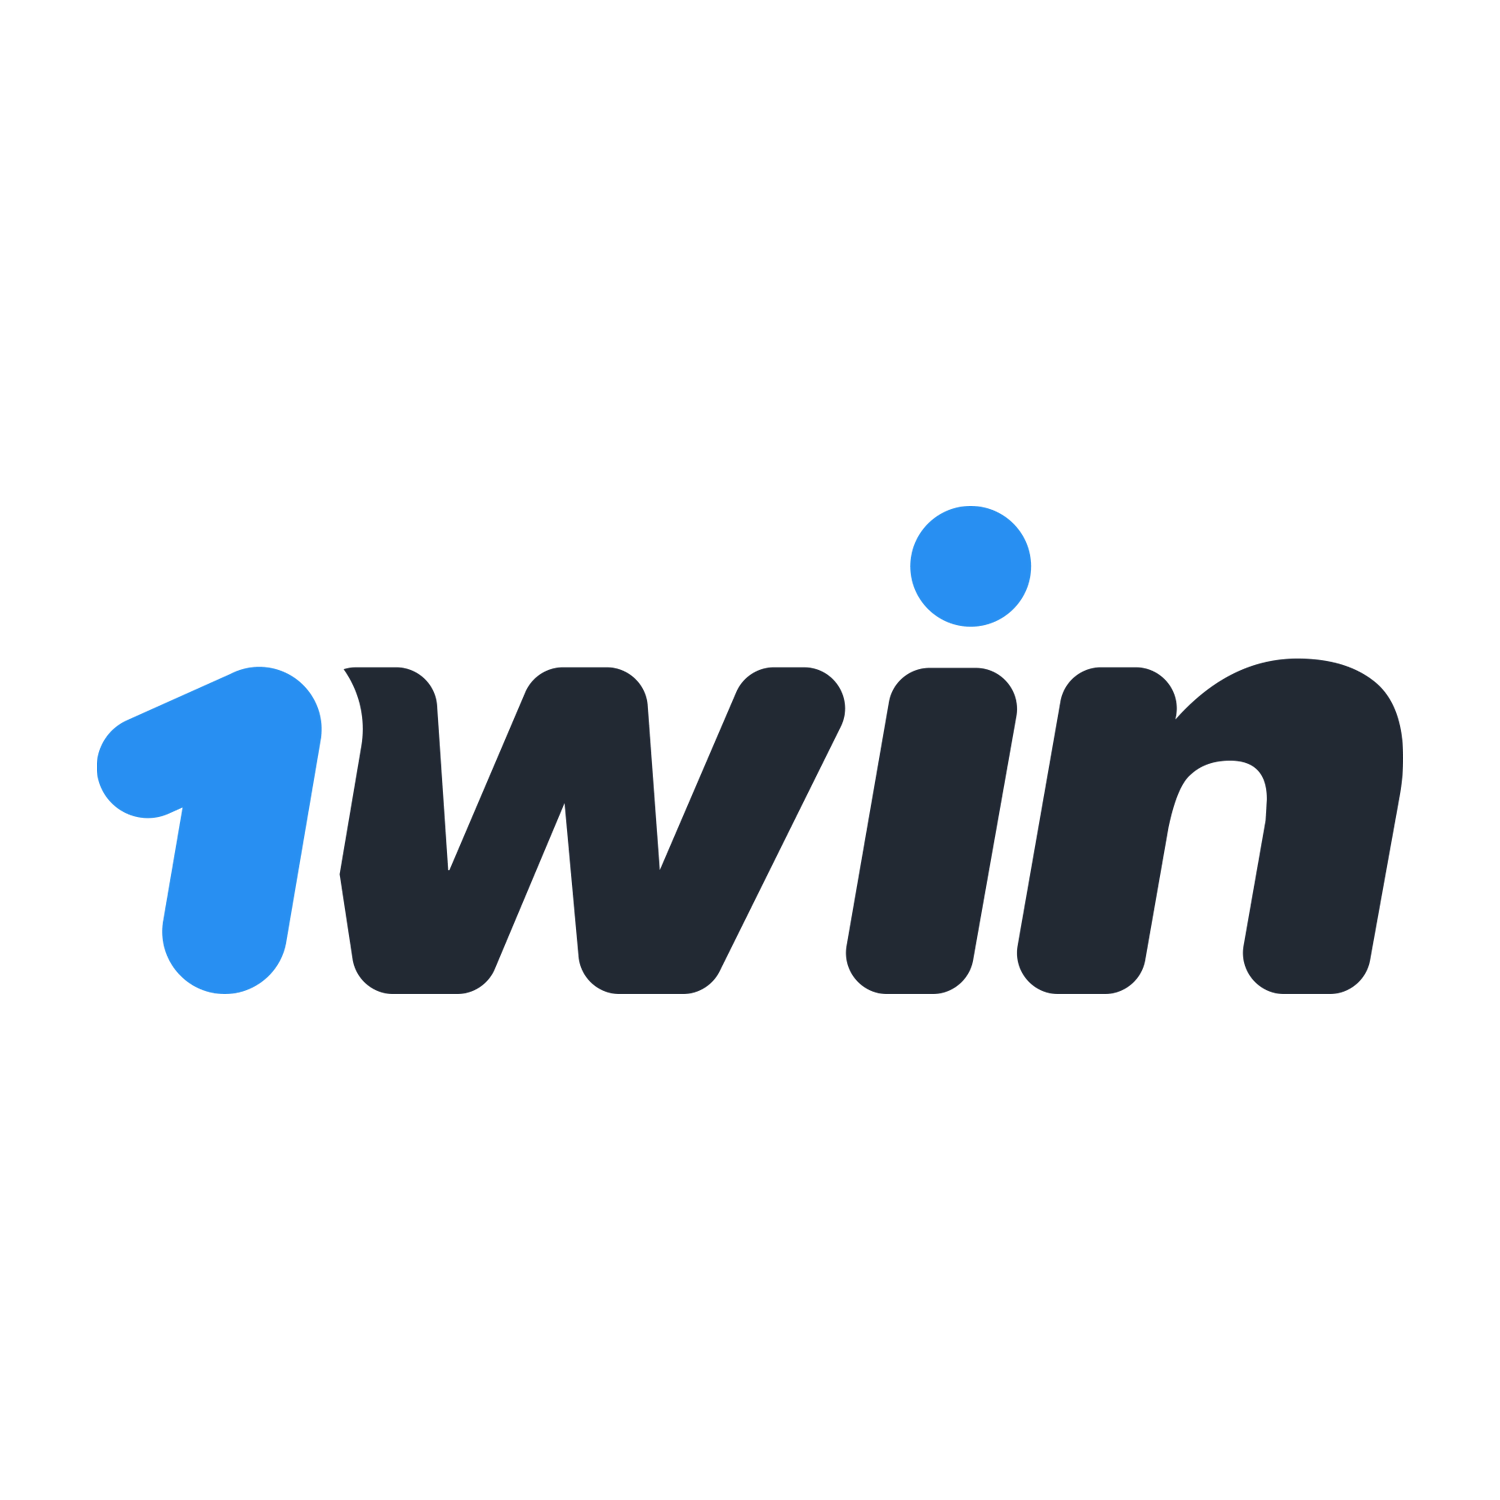 1win allows new users to get a 500% welcome deposit bonus.